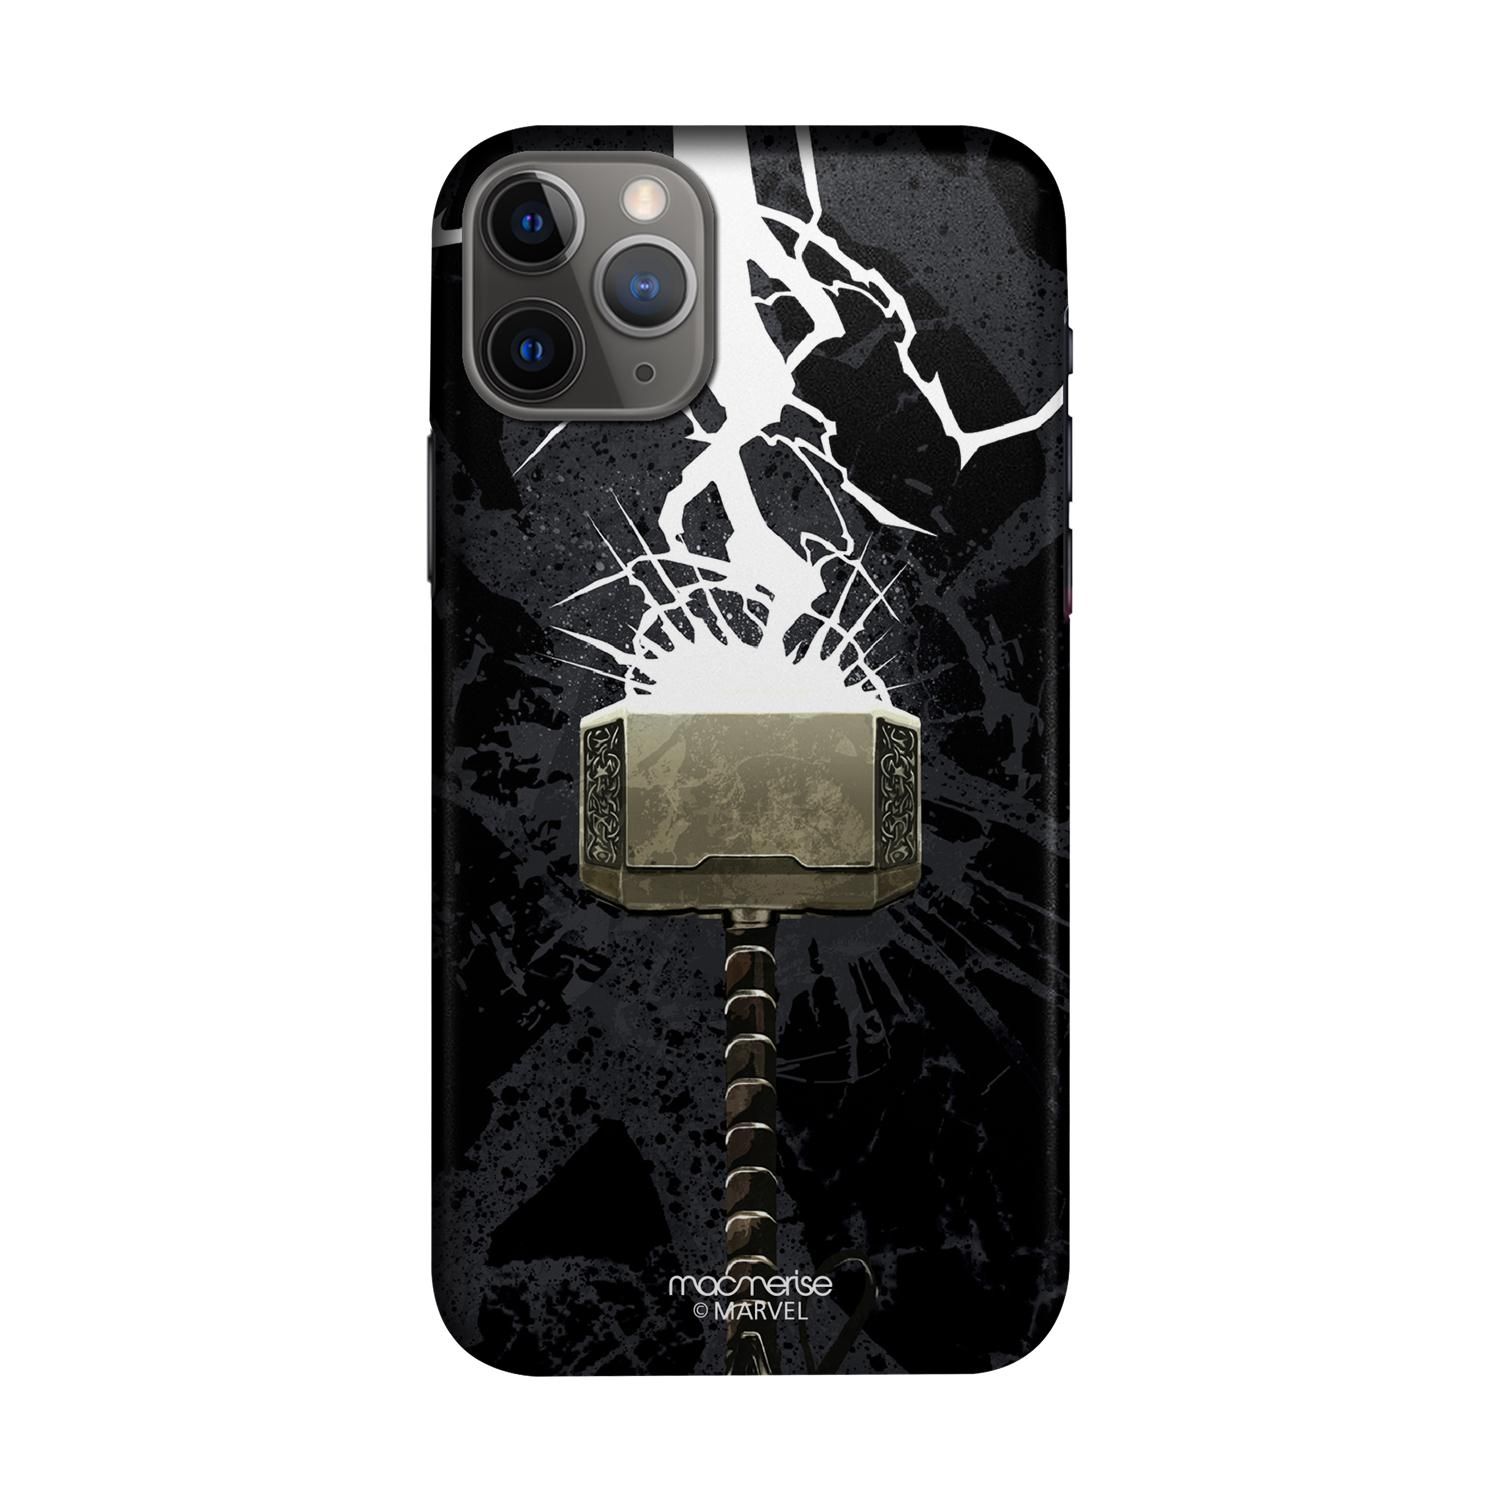 Buy The Thunderous Hammer - Sleek Phone Case for iPhone 11 Pro Max Online